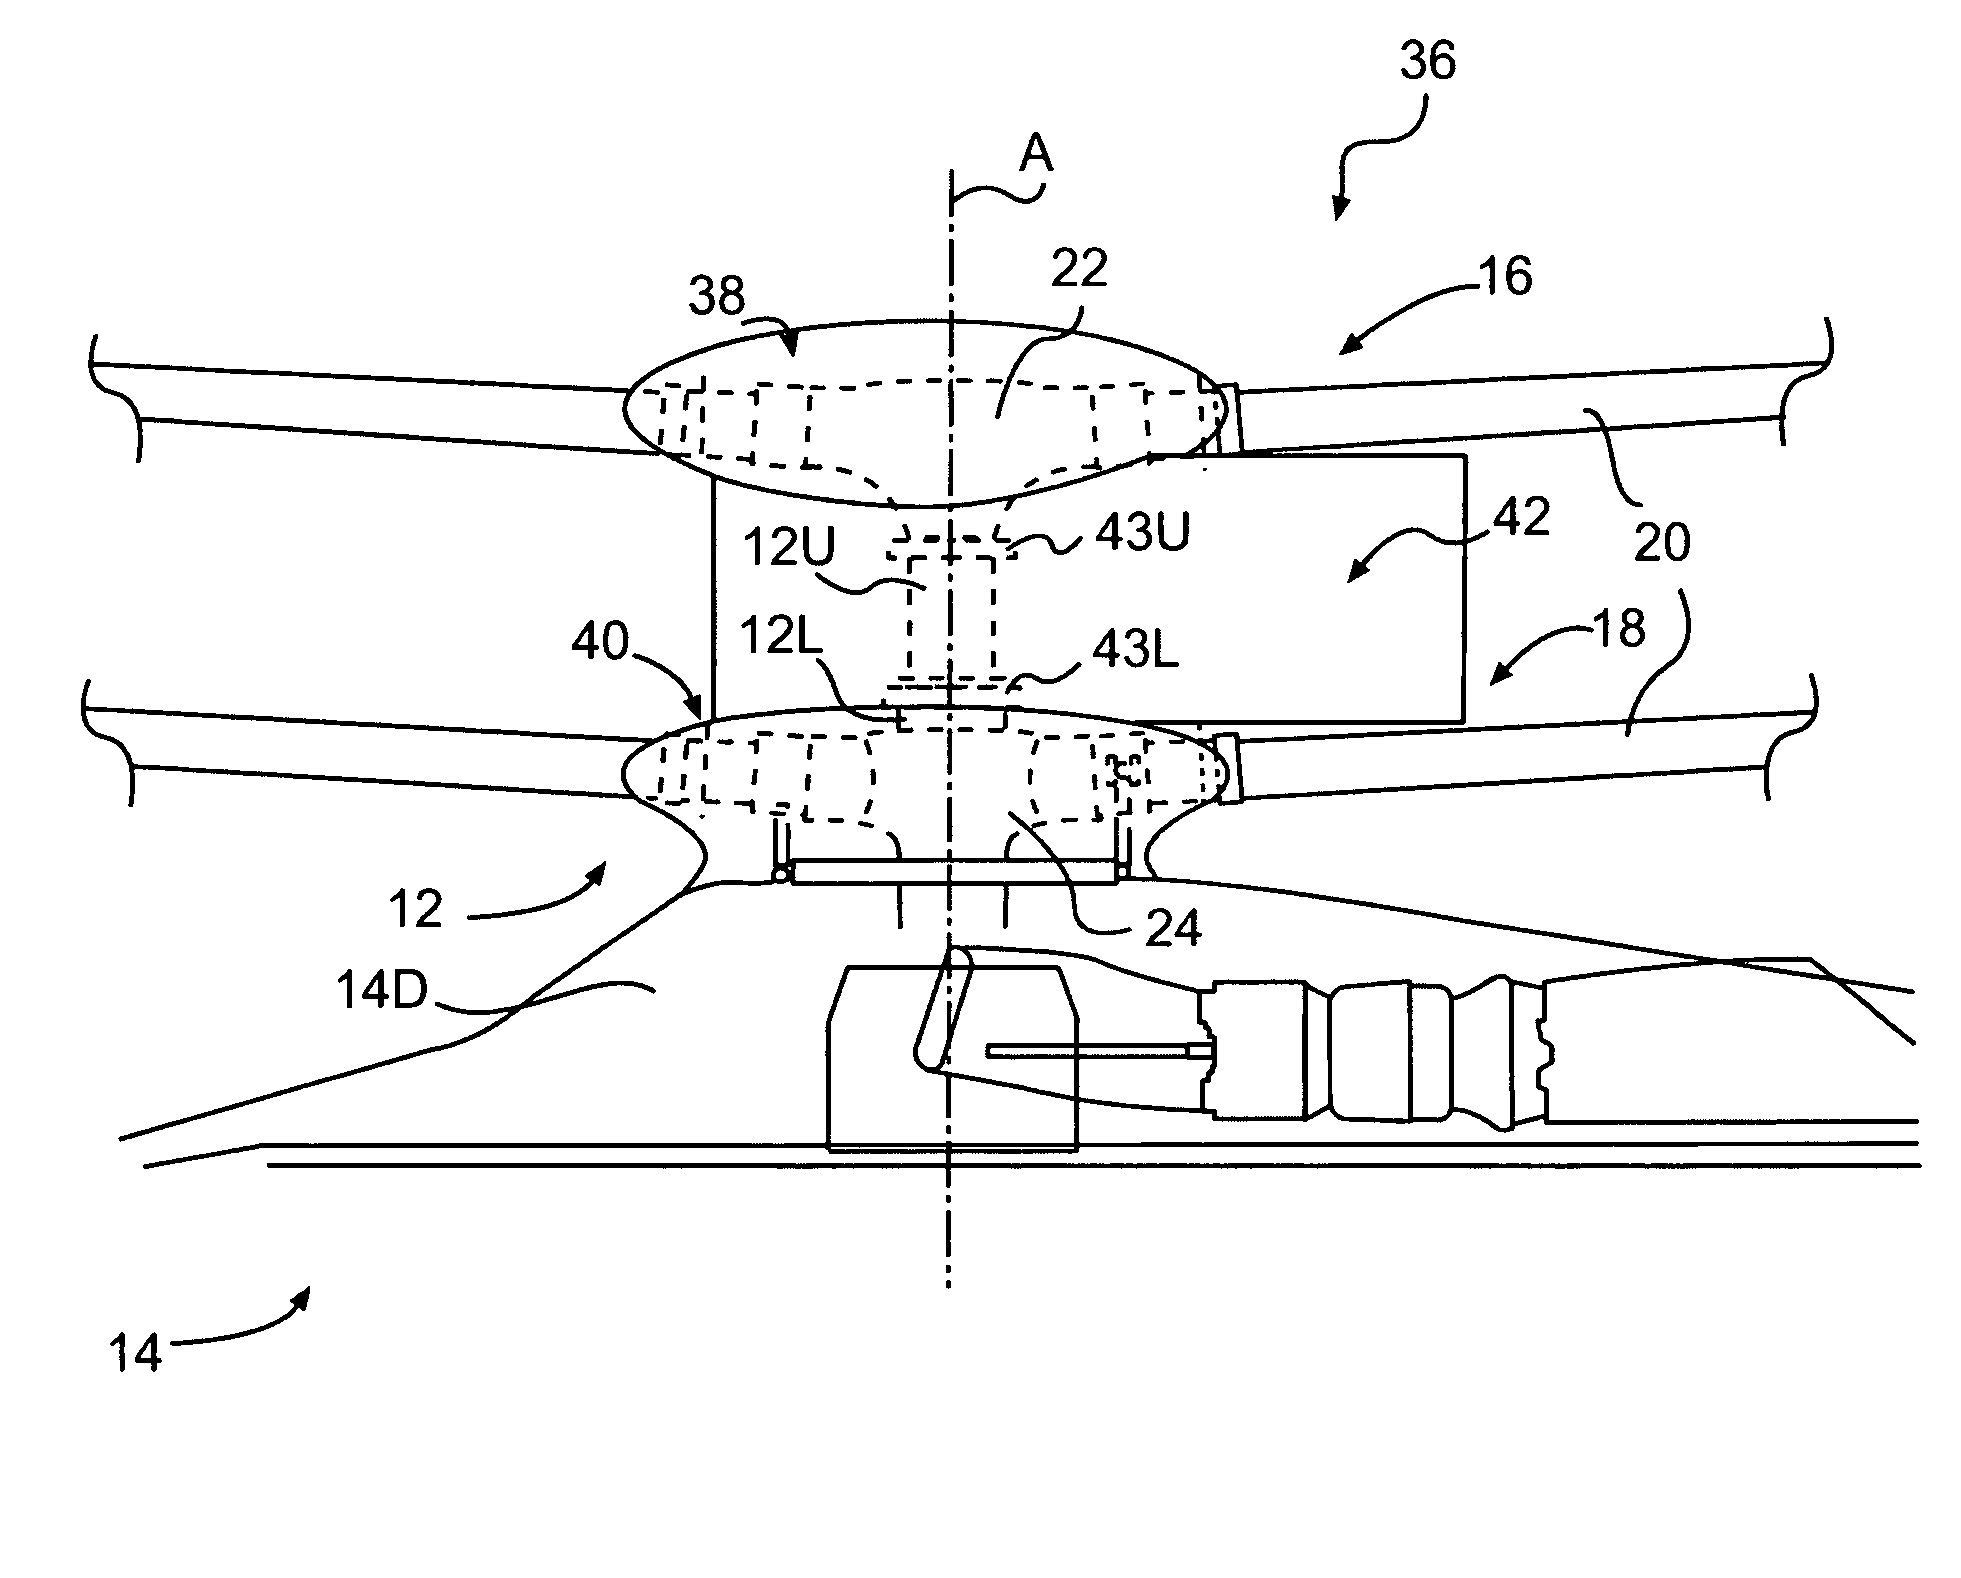 Rotor hub fairing system for a counter-rotating, coaxial rotor system